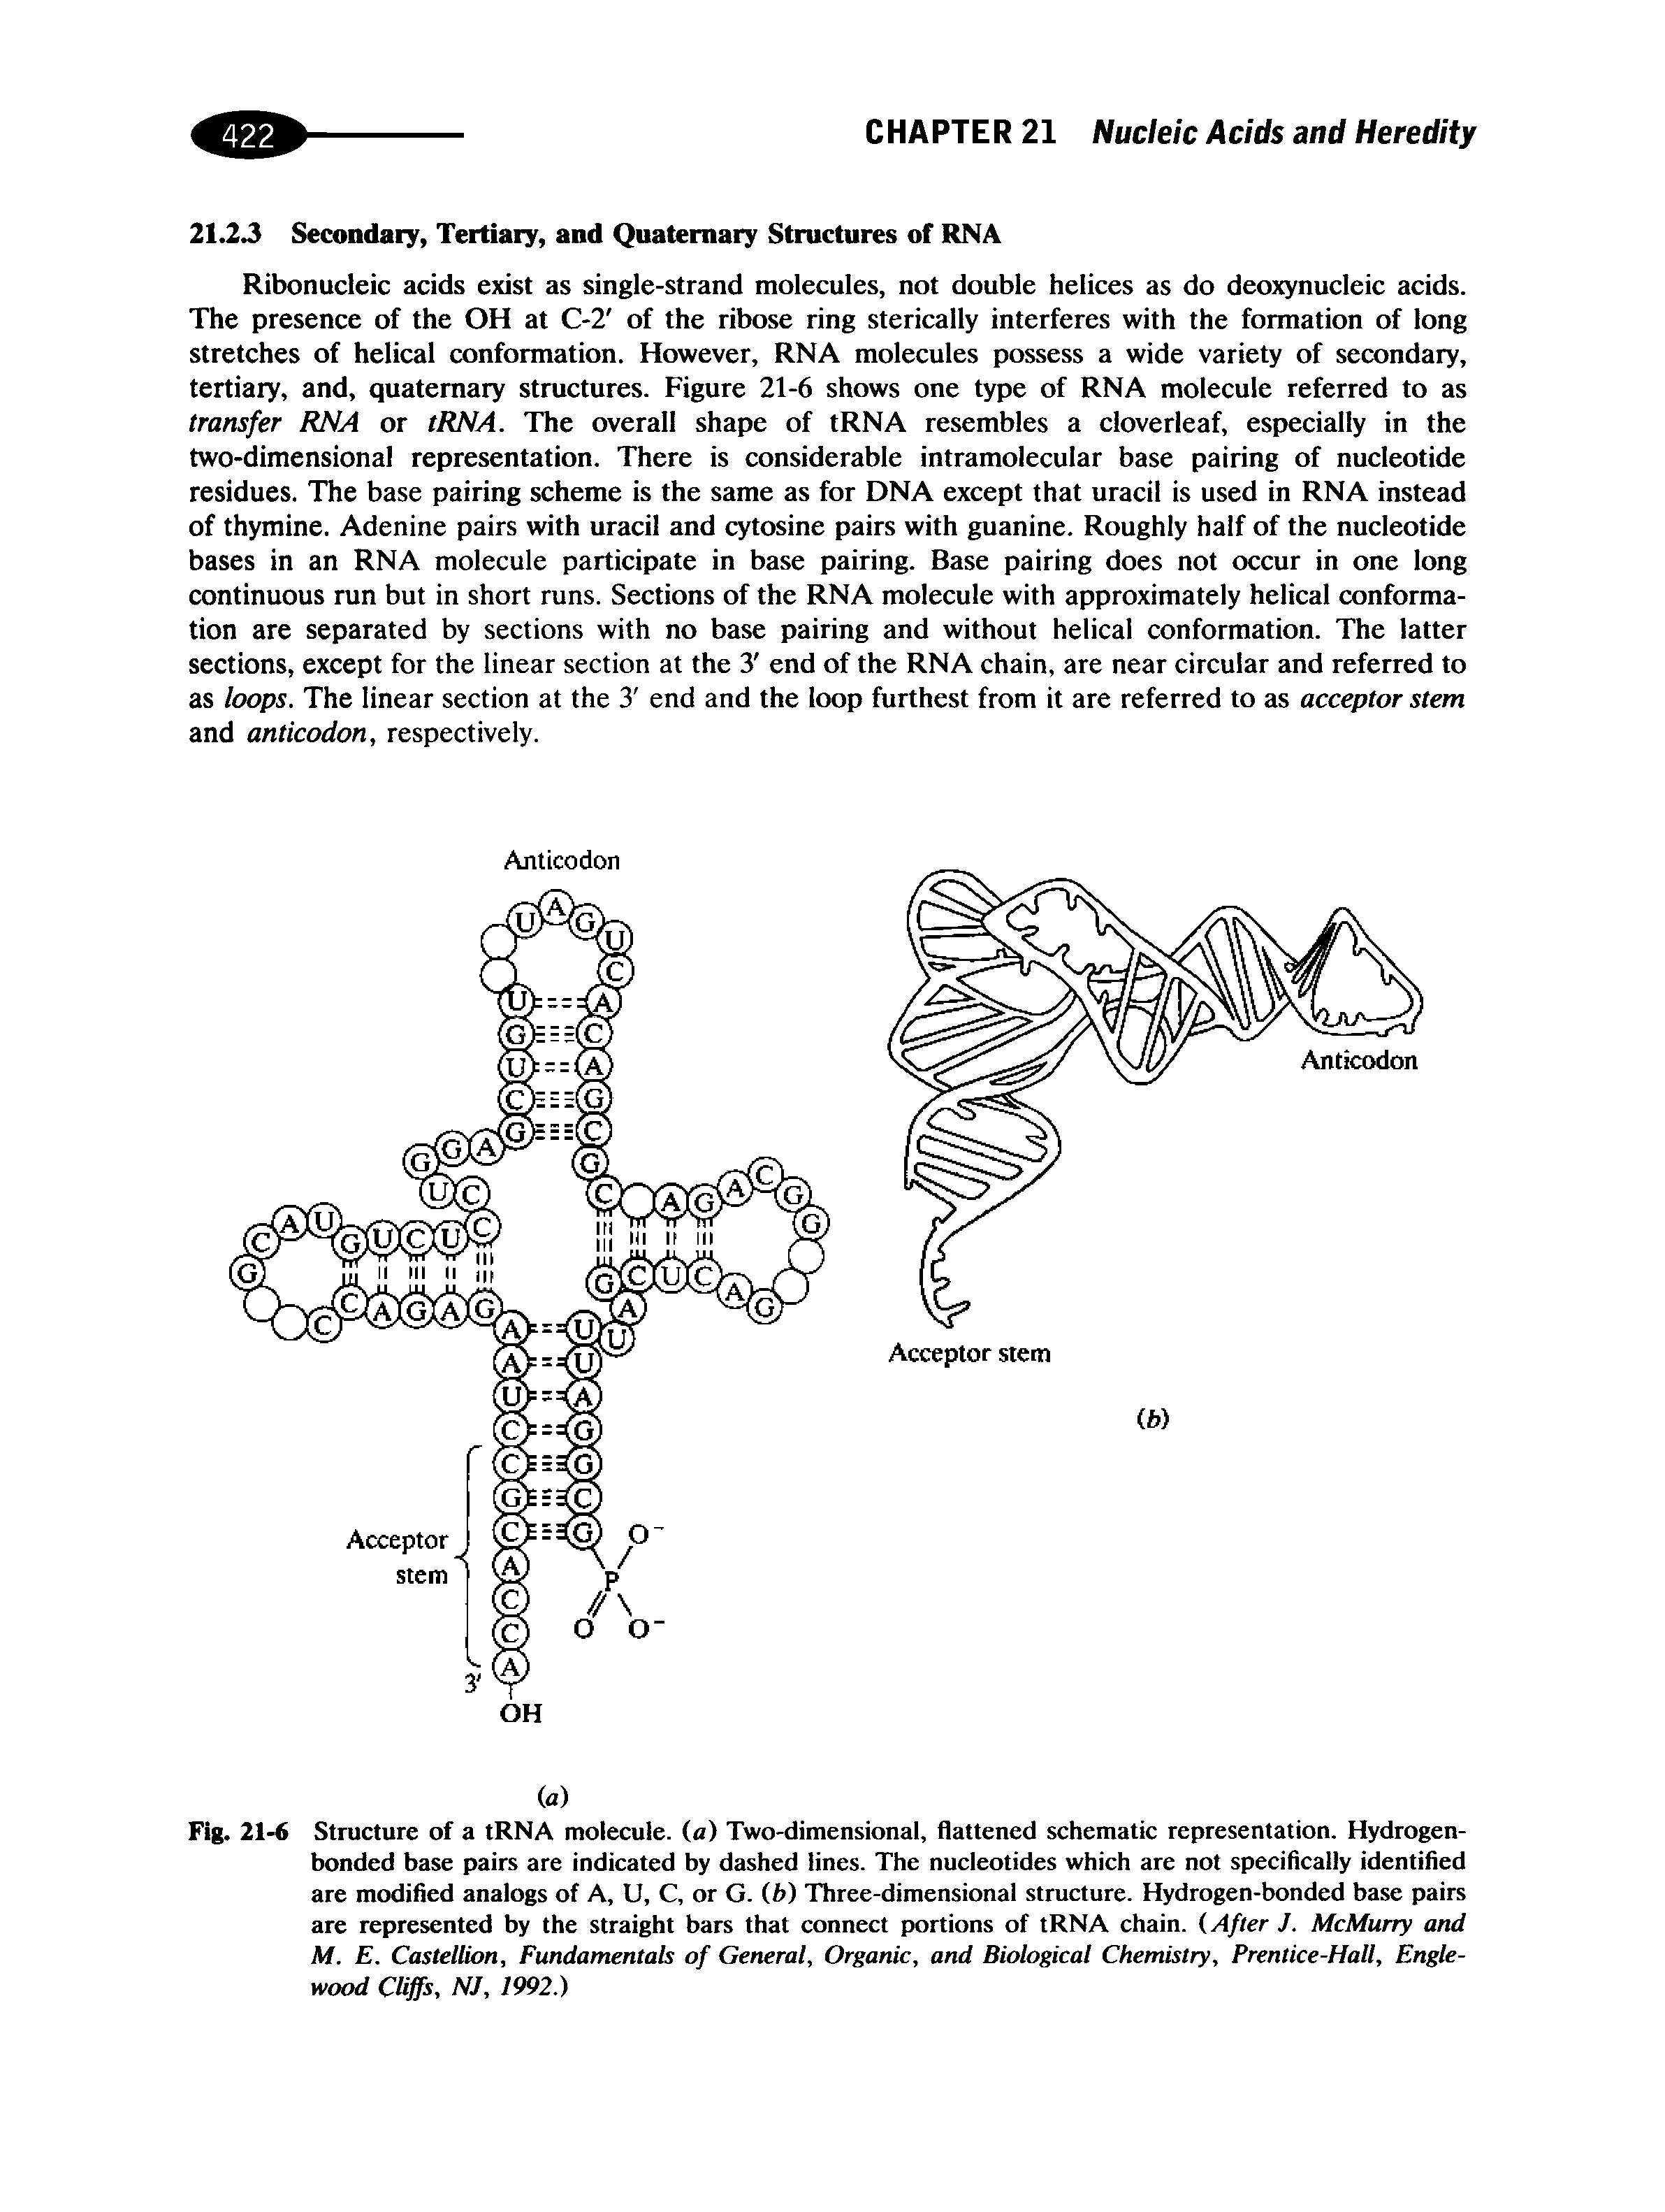 Fig. 21-6 Structure of a tRNA molecule, (a) Two-dimensional, flattened schematic representation. Hydrogen-bonded base pairs are indicated by dashed lines. The nucleotides which are not specifically identified are modified analogs of A, U, C, or G. (b) Three-dimensional structure. Hydrogen-bonded base pairs are represented by the straight bars that connect portions of tRNA chain. (After J. McMurry and M. E. CastelUon, Fundamentals of General, Organic, and Biological Chemistry, Prentice-Hall, Englewood Cliffs, NJ, 1992.)...